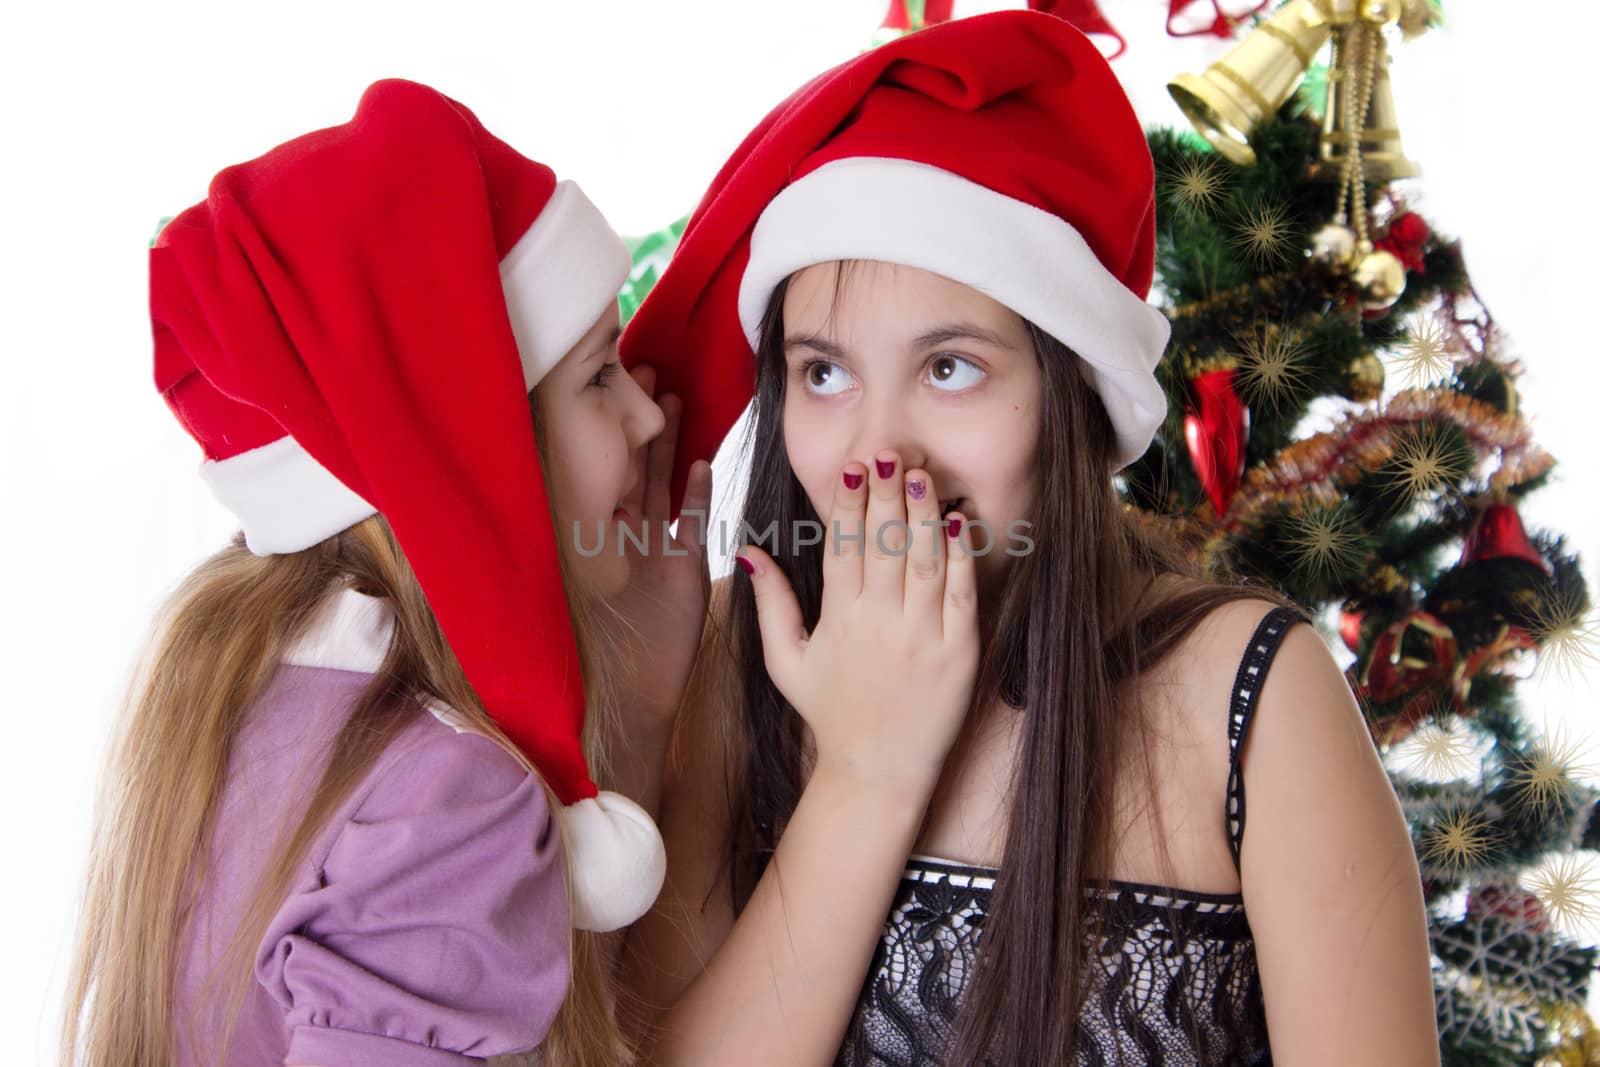 Two eleven years old girls sharing each other secrets on Christmas Eve